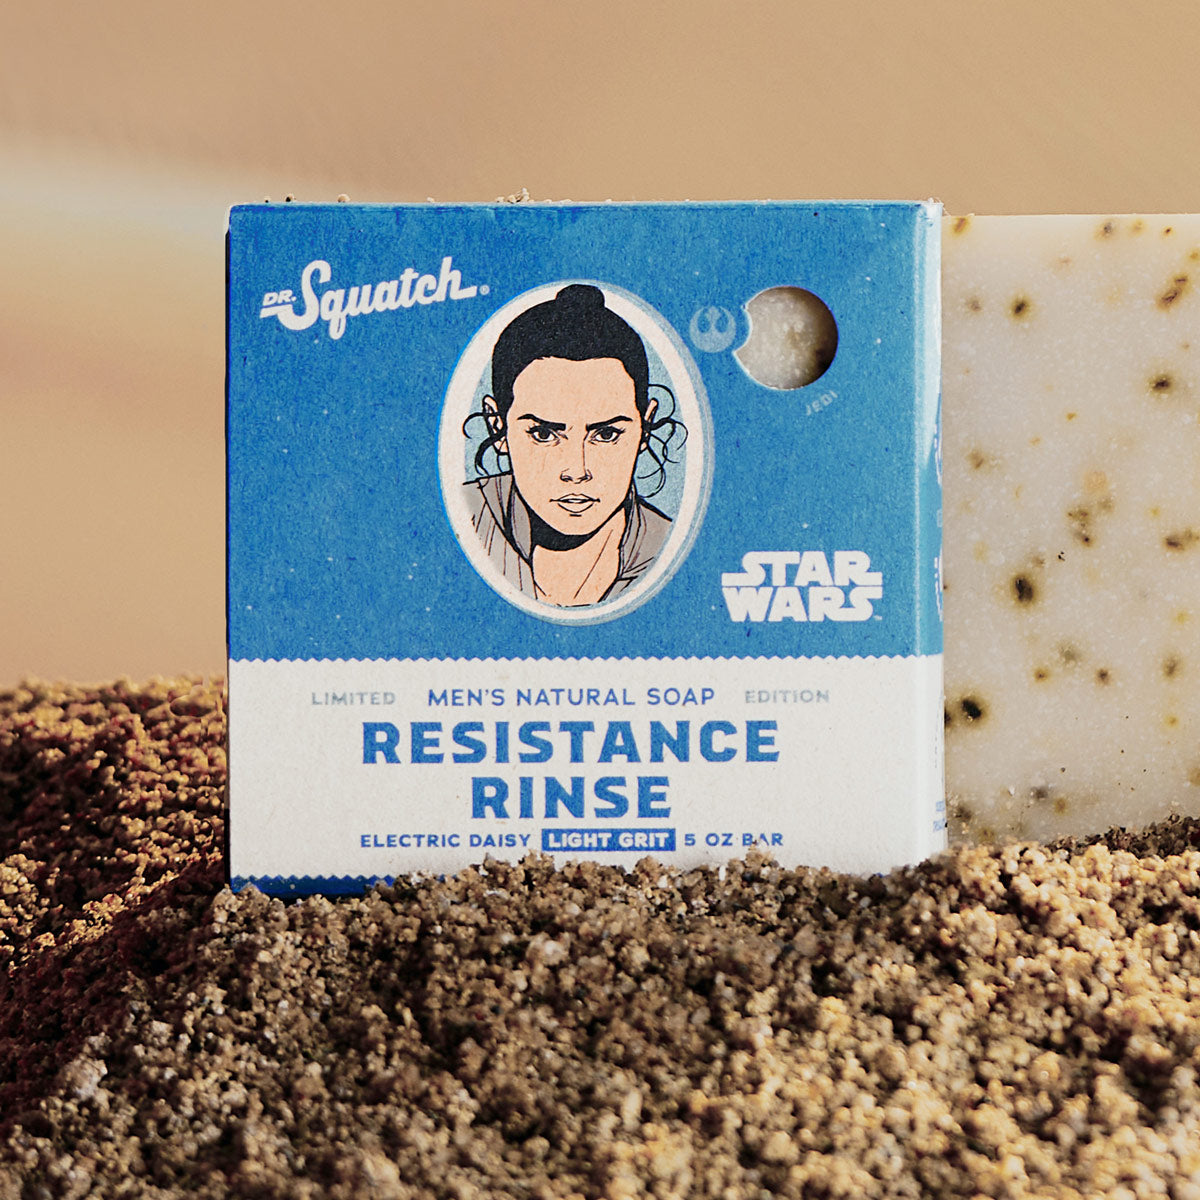 The Star Wars™ Soap Saver